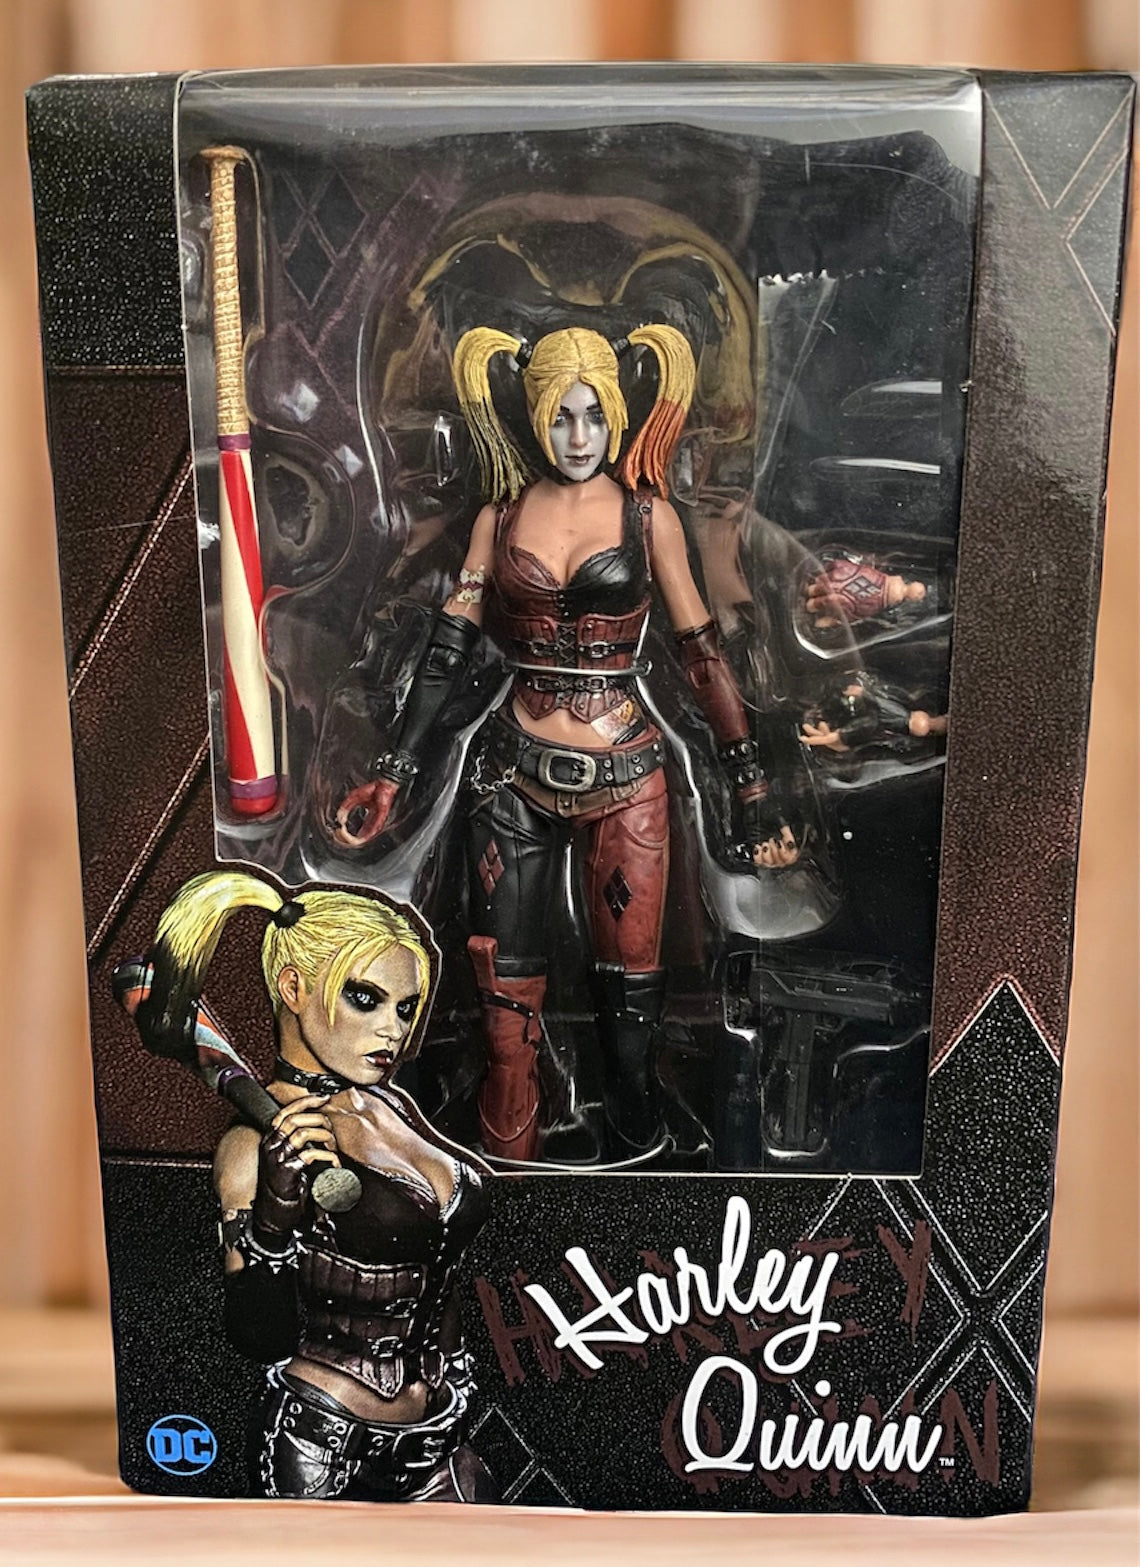 NECA Arkham City Harley Quinn Action Figure (1/4 Scale)/New and Sealed Box